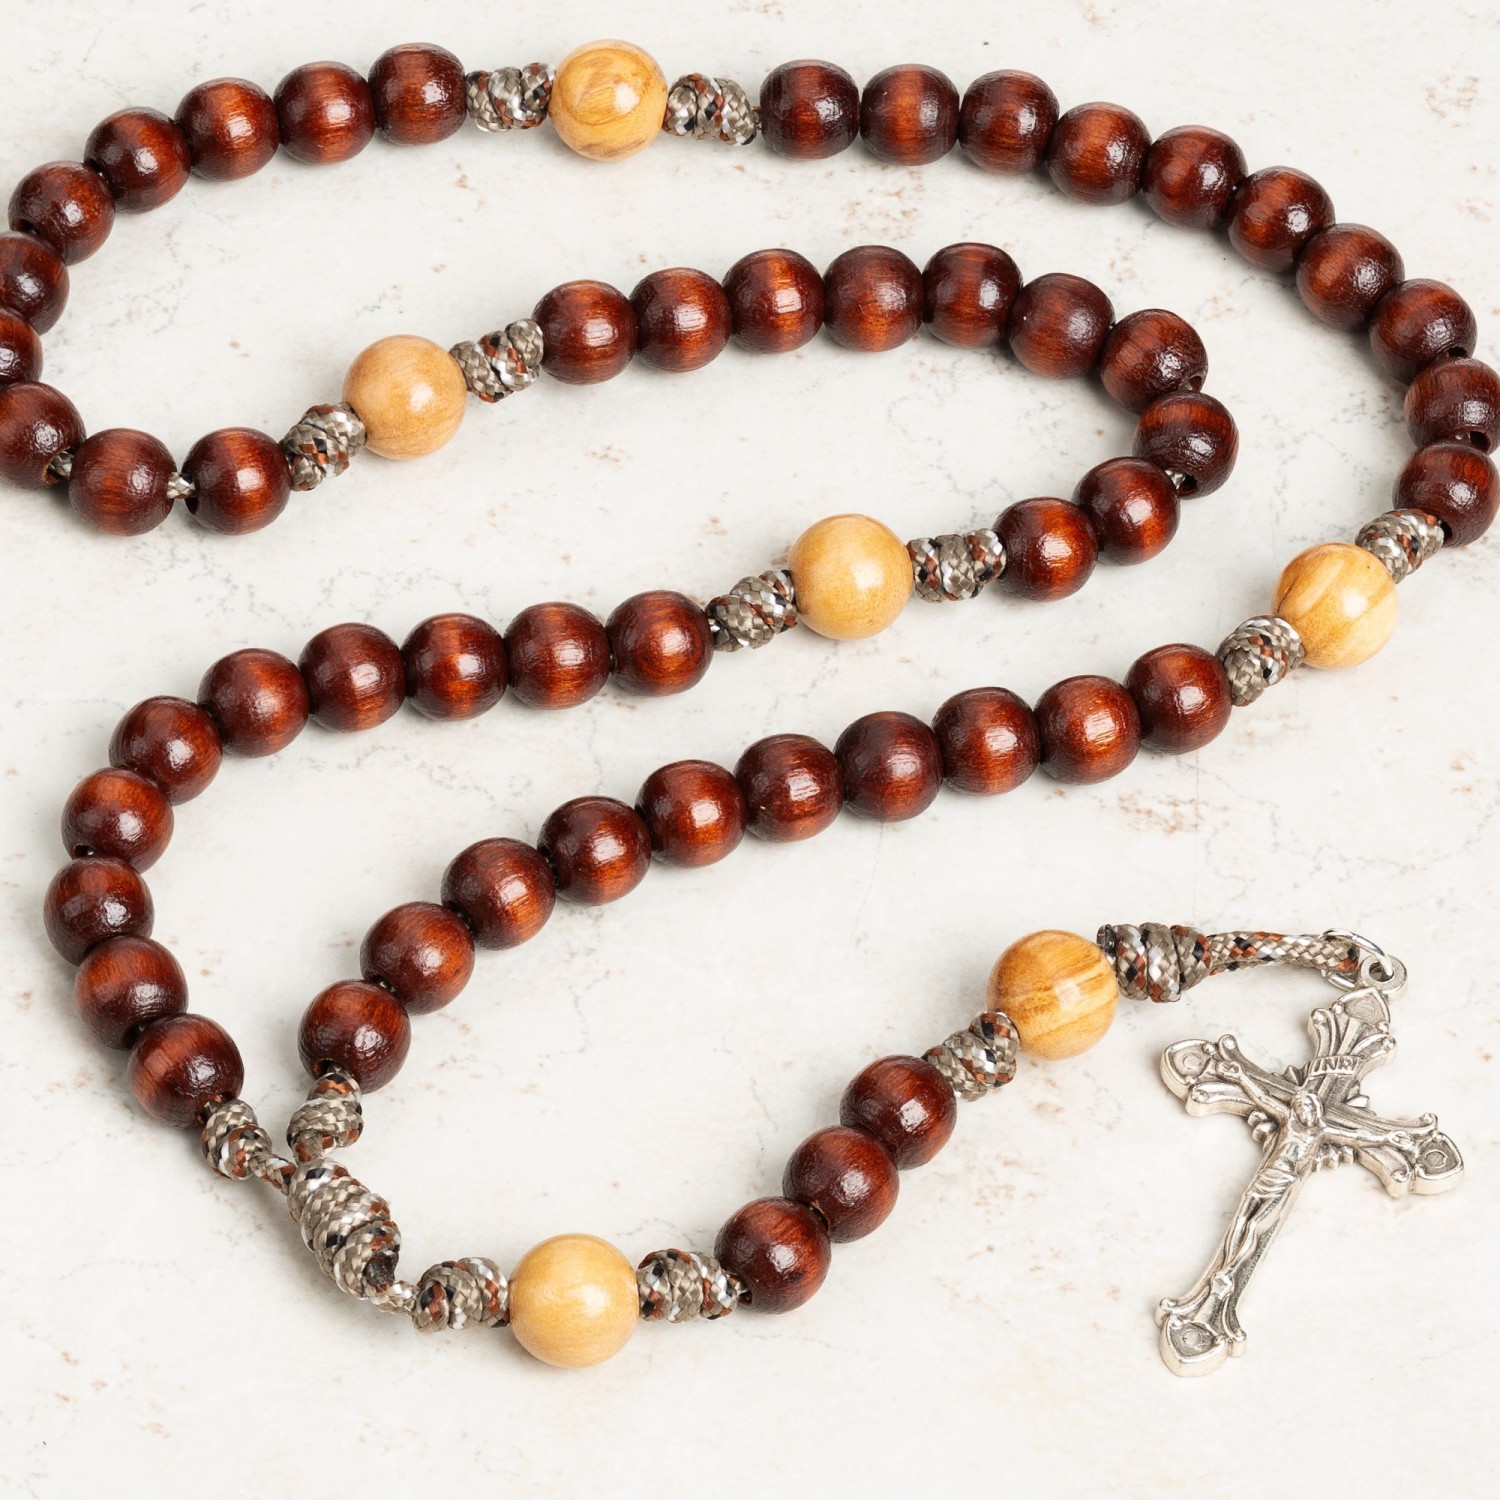 Buy Knotted Cord Brown Rosary Kits